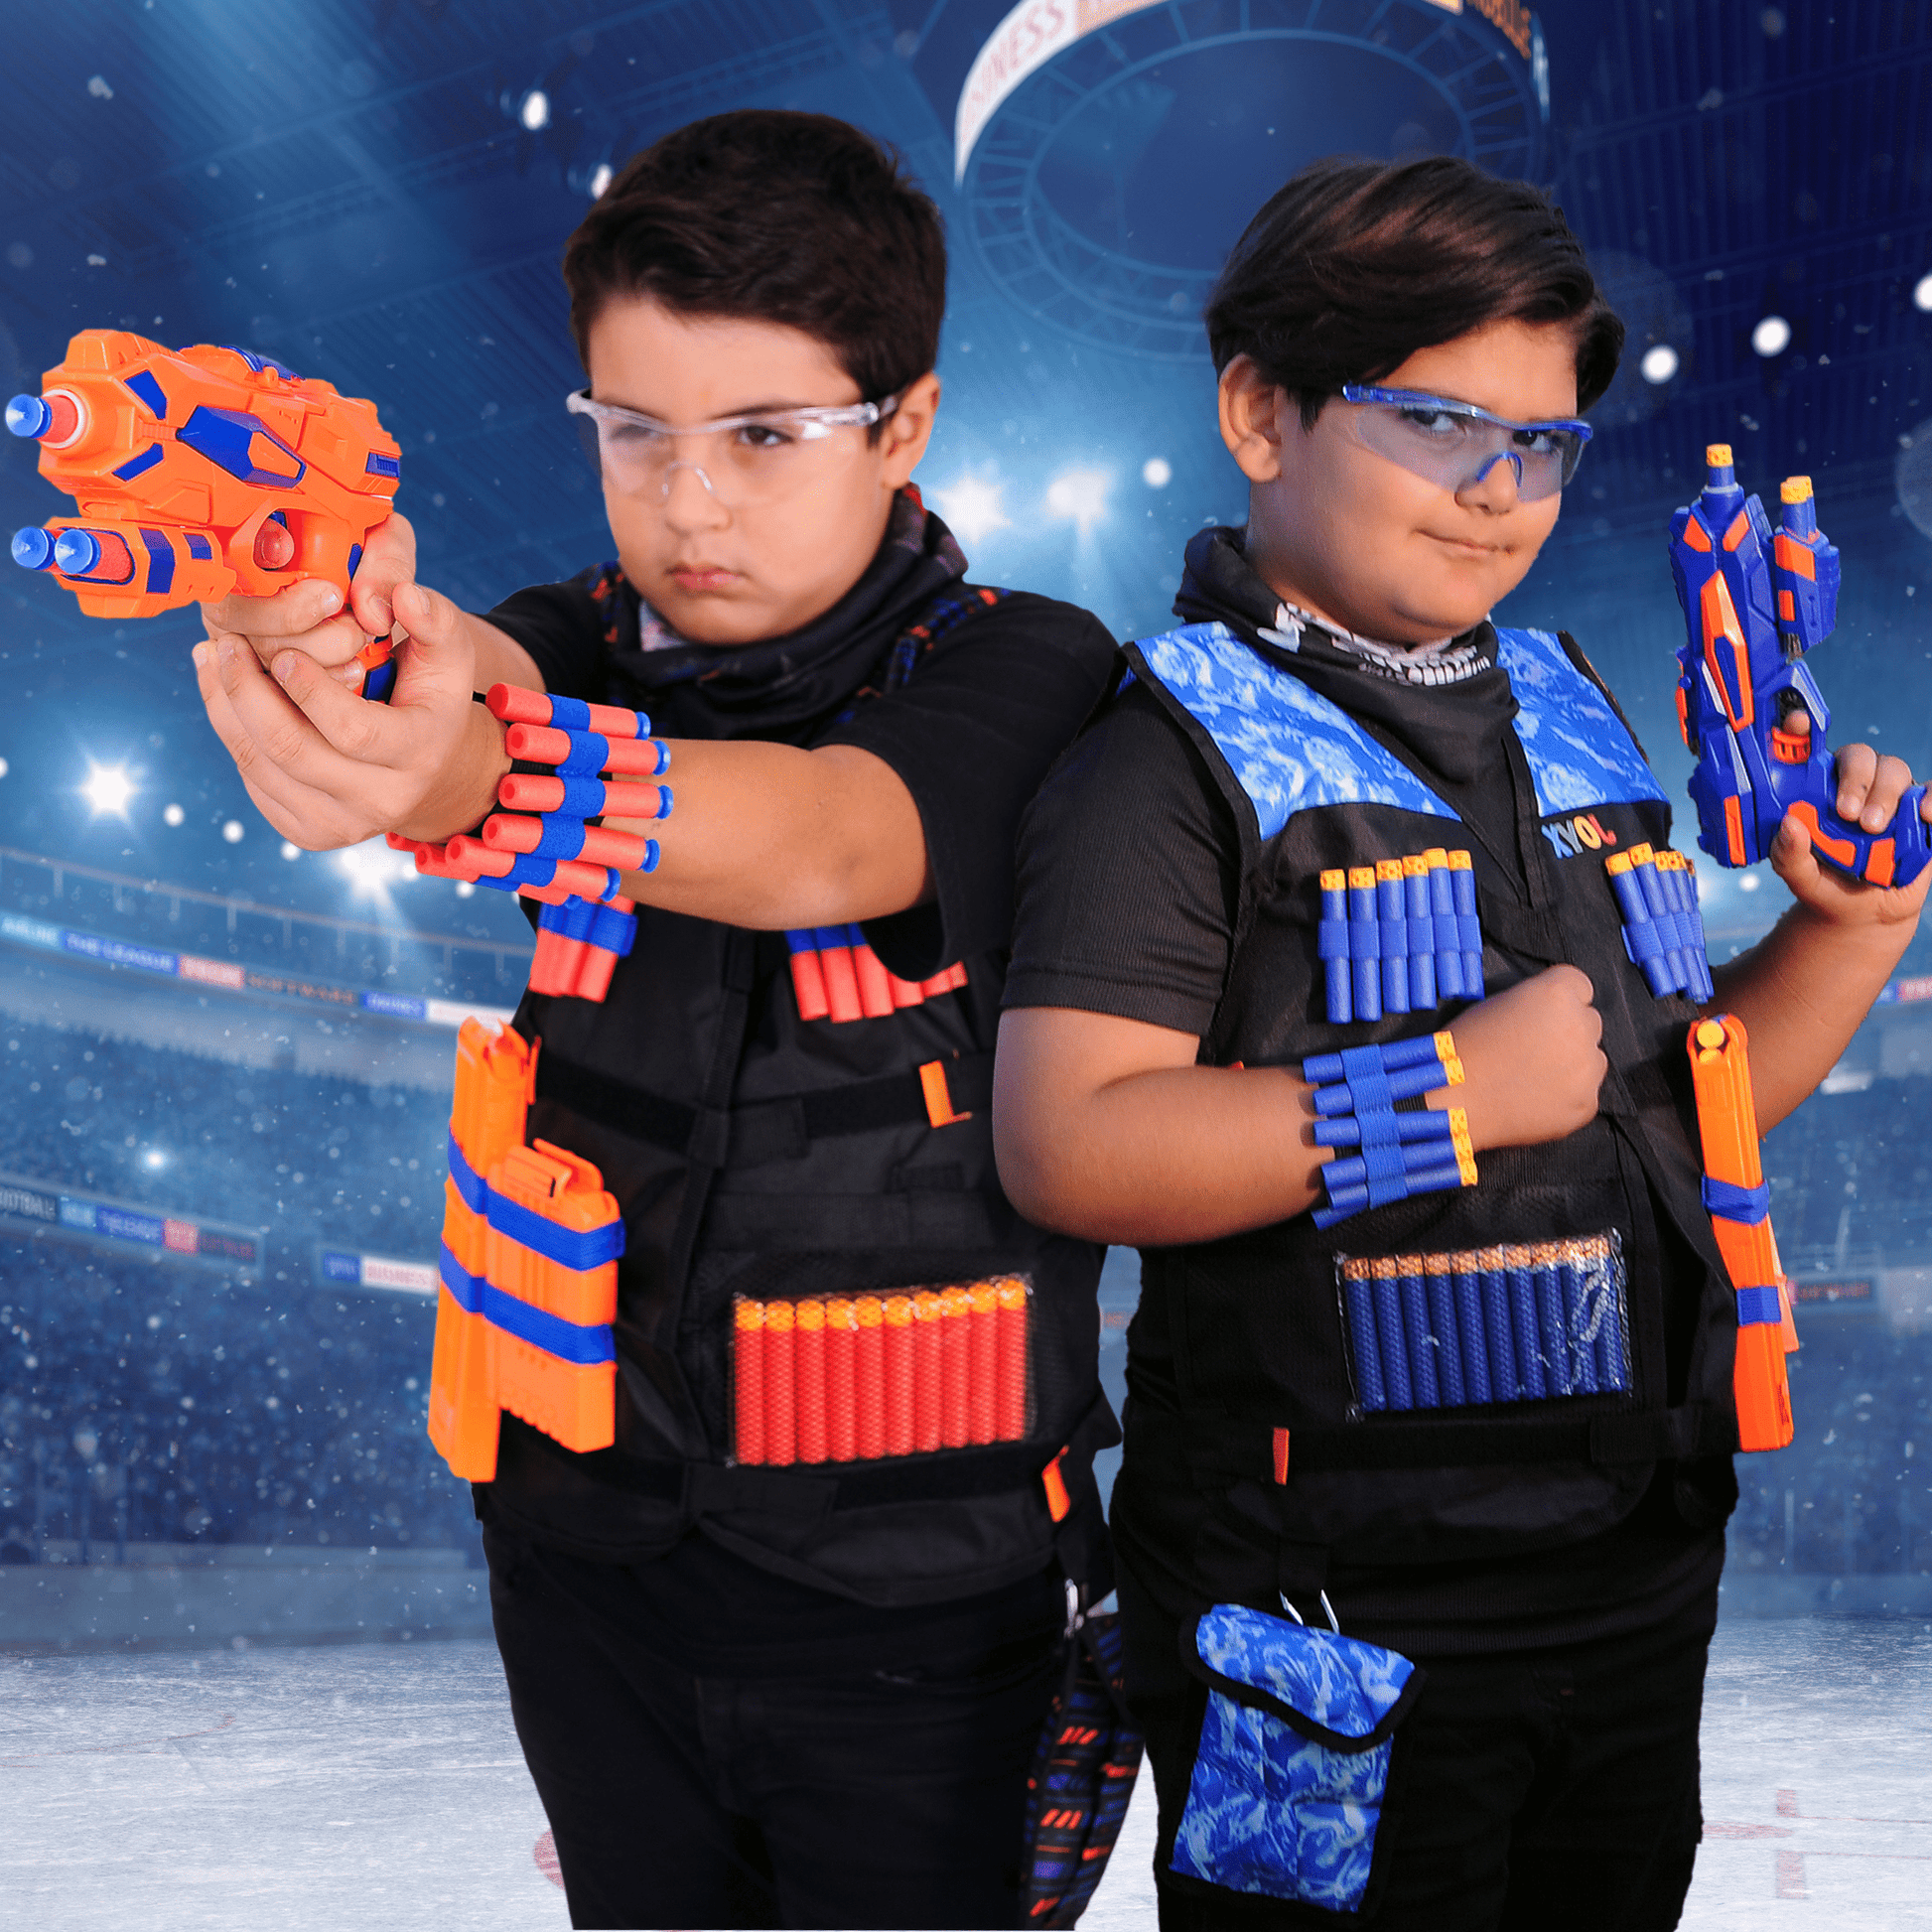 Two children engaged in a space-themed adventure, equipped with JoyX blaster guns and tactical dart vests, against a cosmic background.